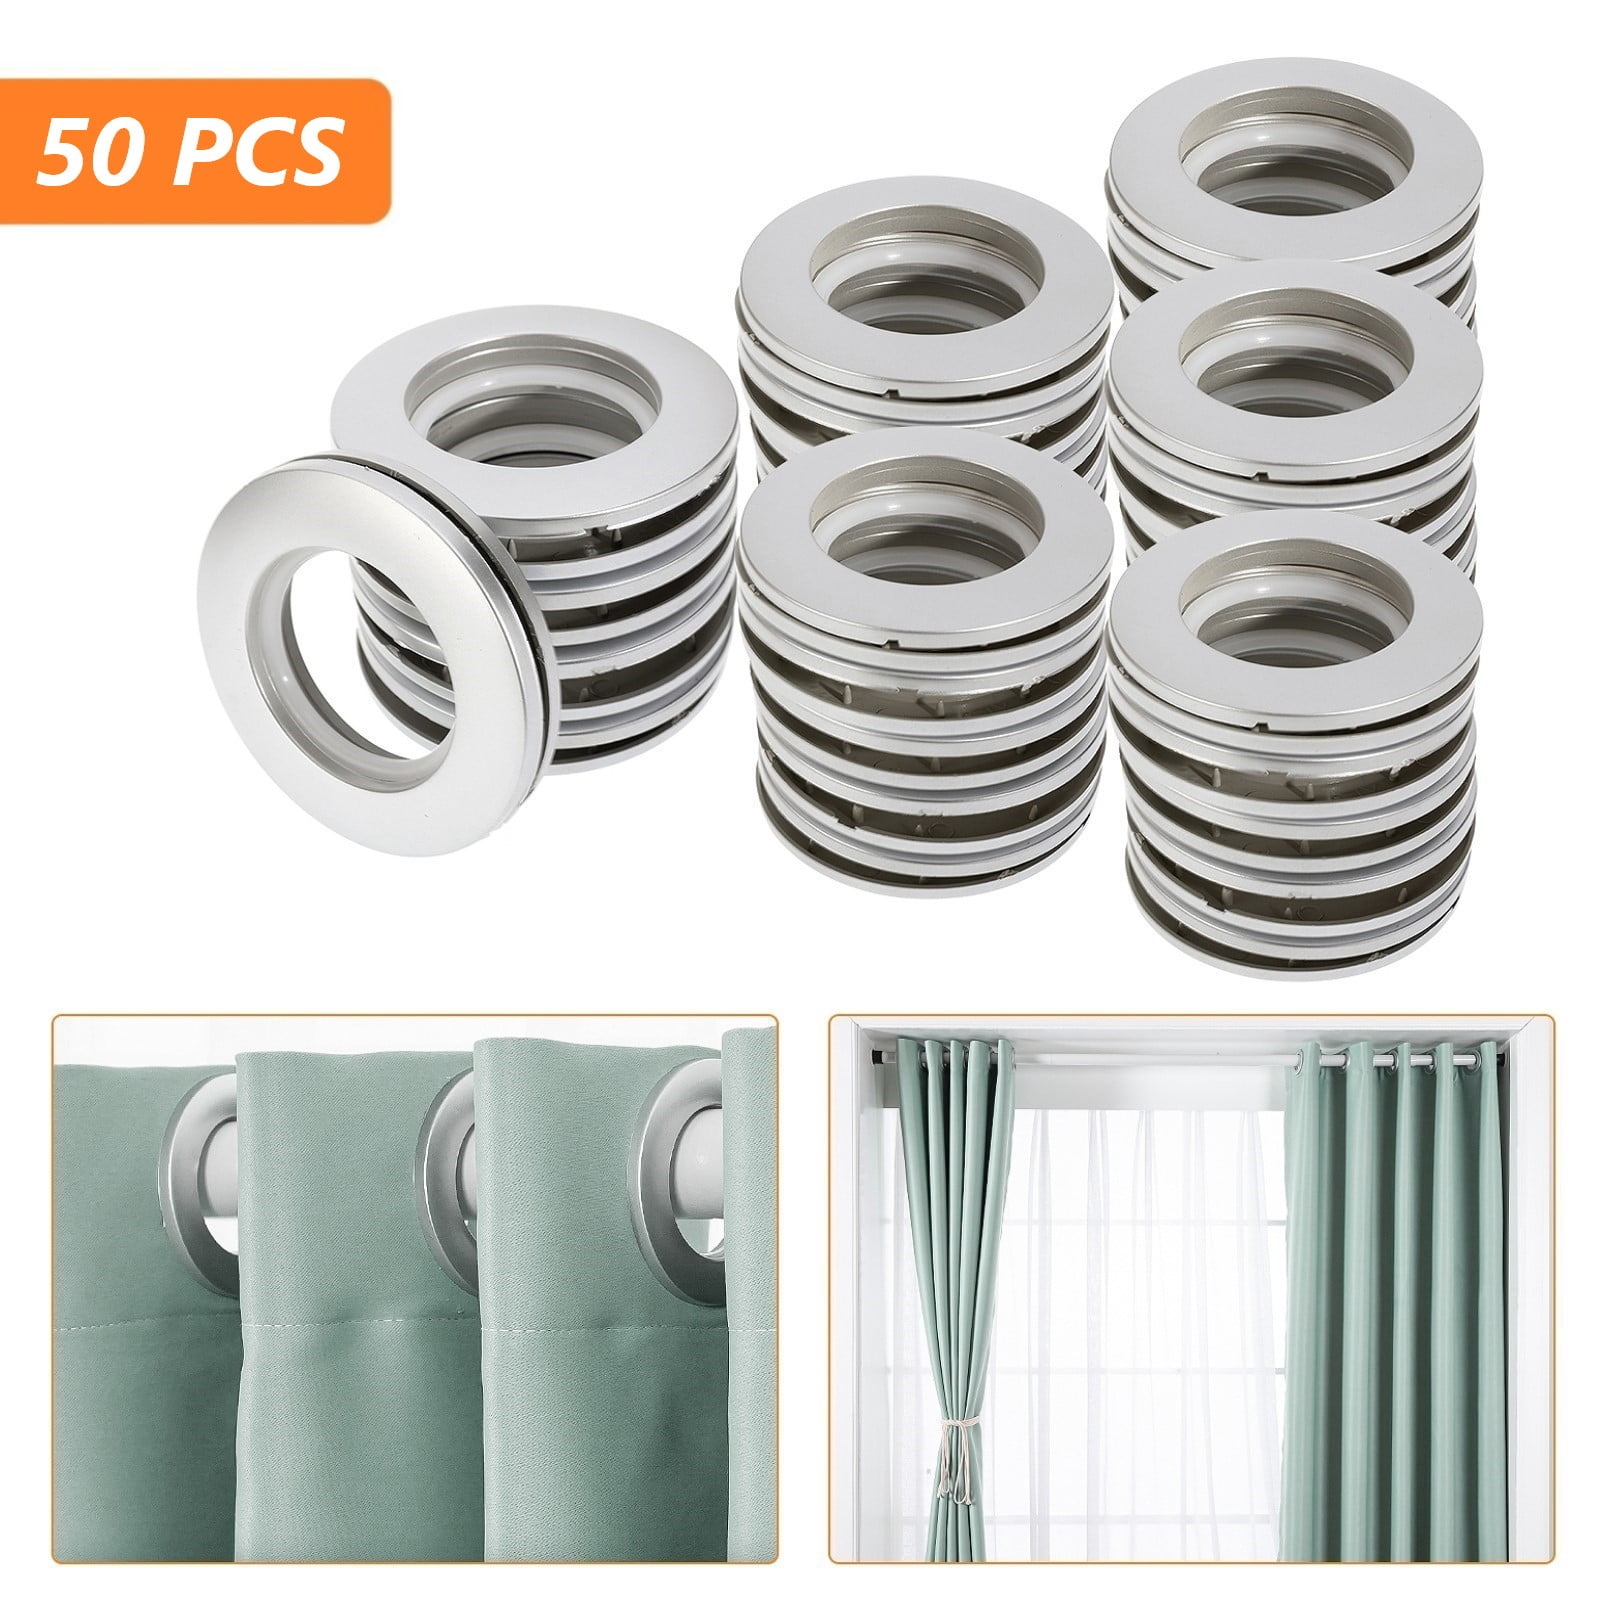 Rustark 20 Sets 1-5/8 (42mm) Inner Diameter Curtain Grommet with  Connectors Silver Round Plastic Curtain Rings Curtain Spacers Low Noise  Curtain